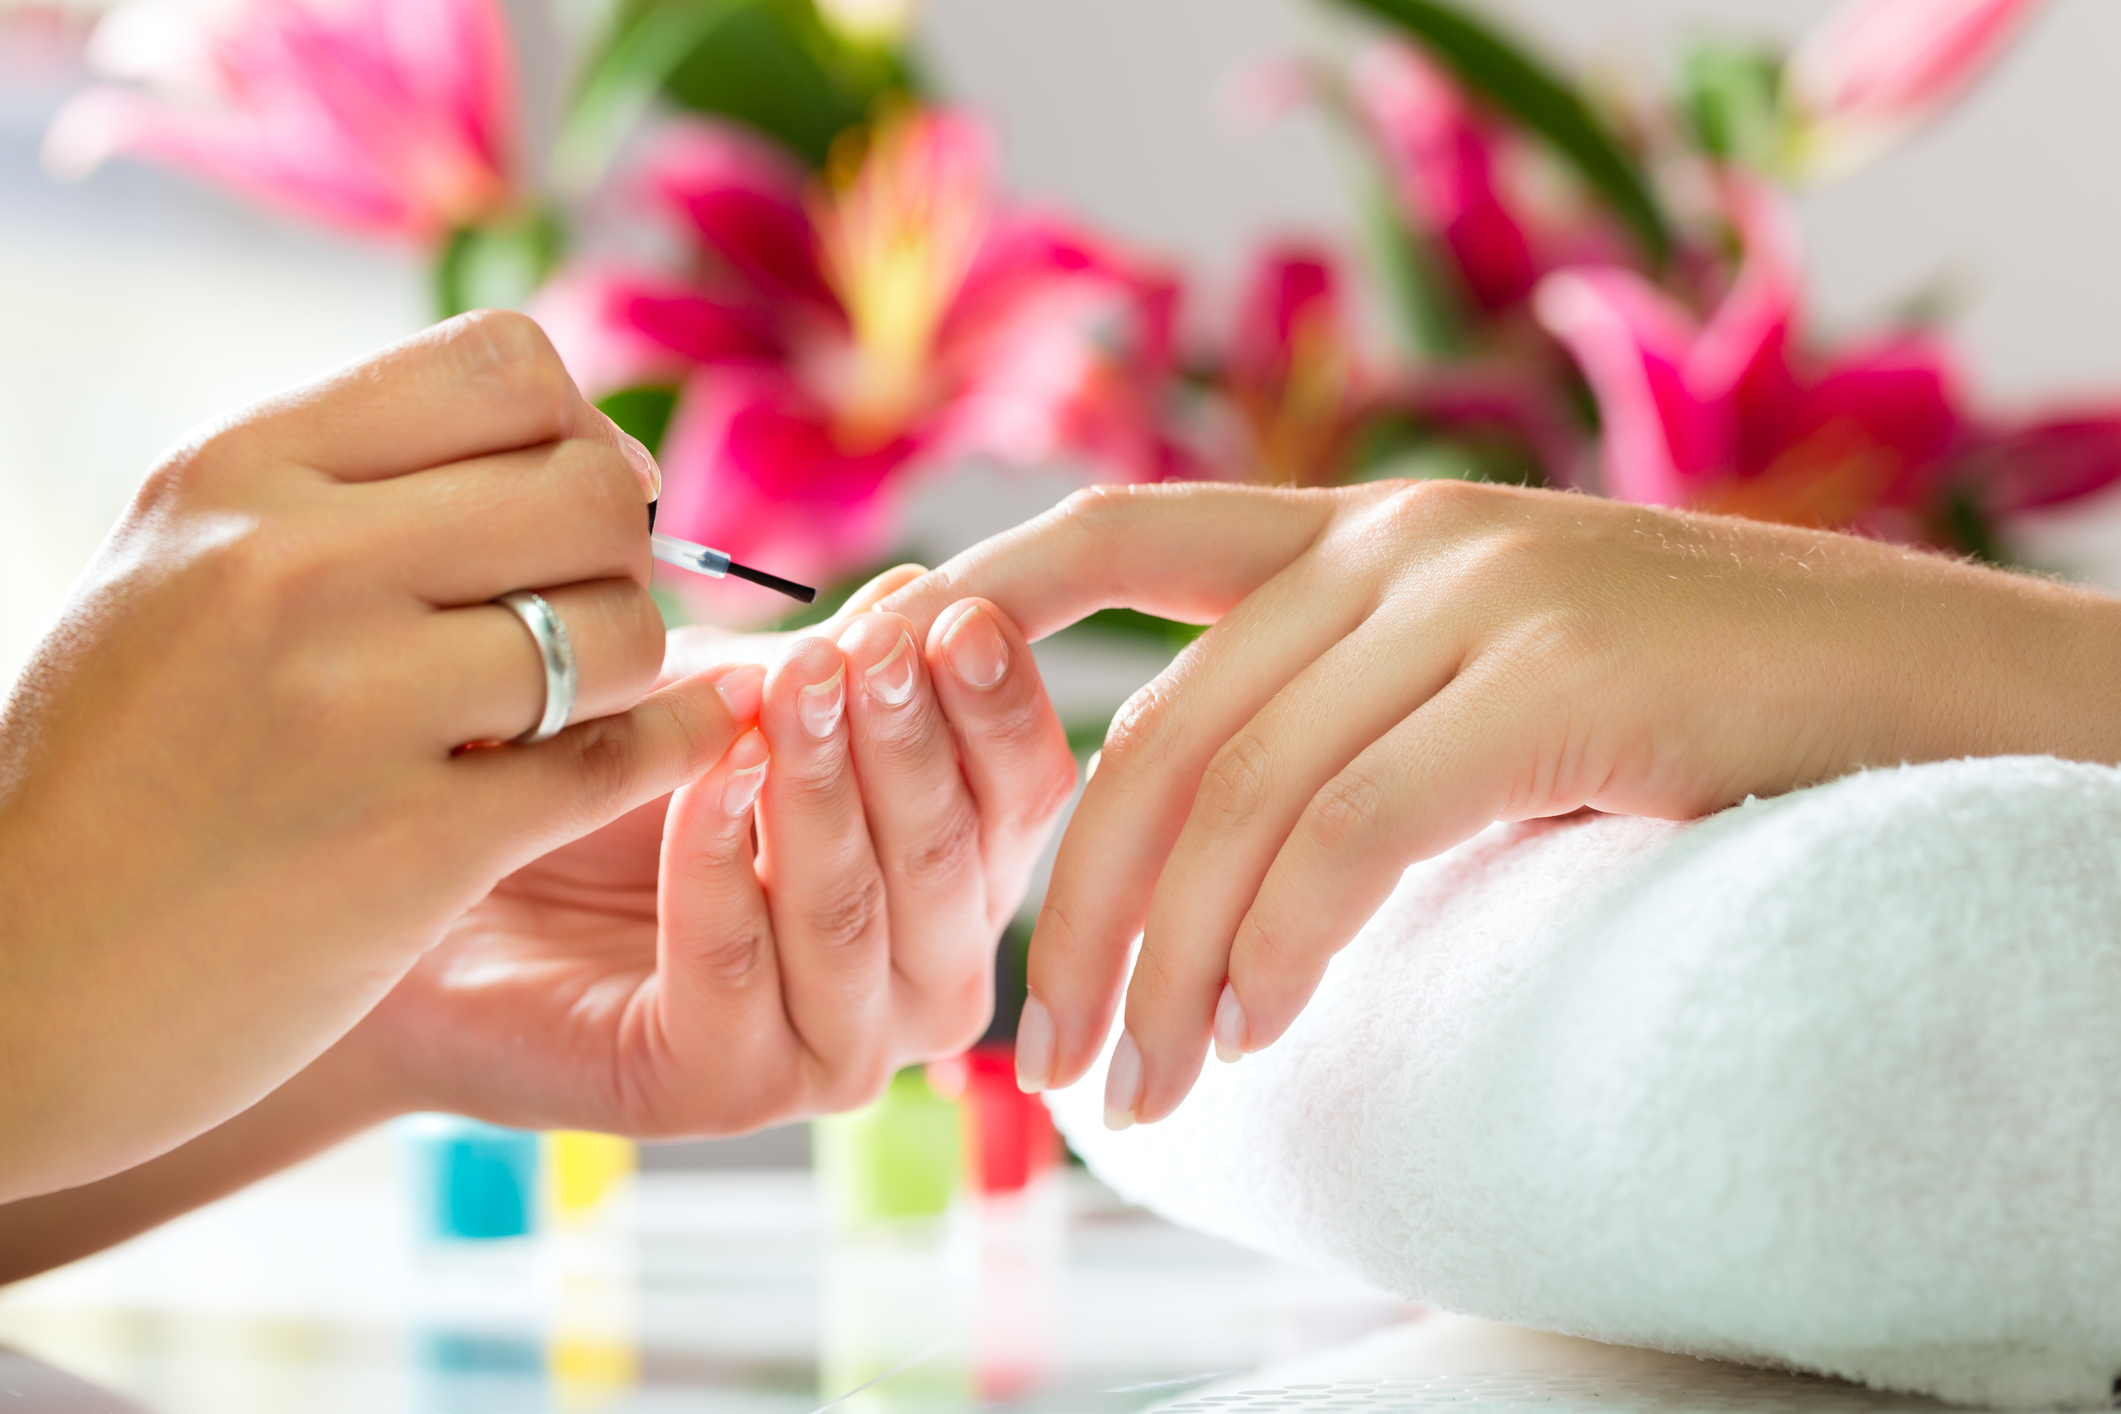 How to Start a Nail Business at Home